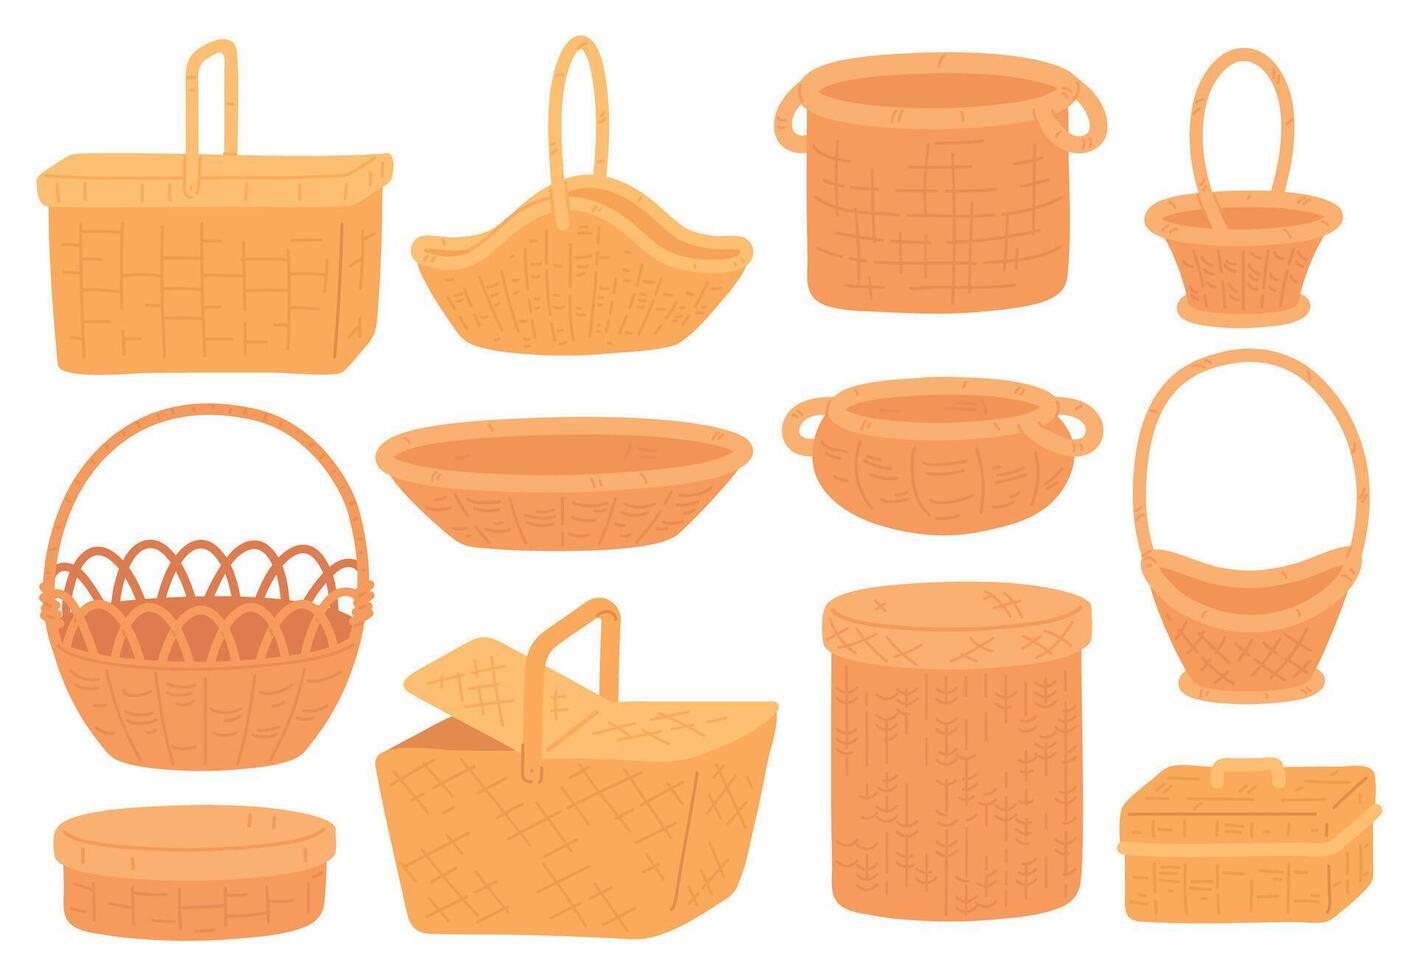 Wicker baskets. Empty straw basket for picnic, grocery or gift. Handmade round bamboo hamper and box. Trendy flat rattan basketry vector set